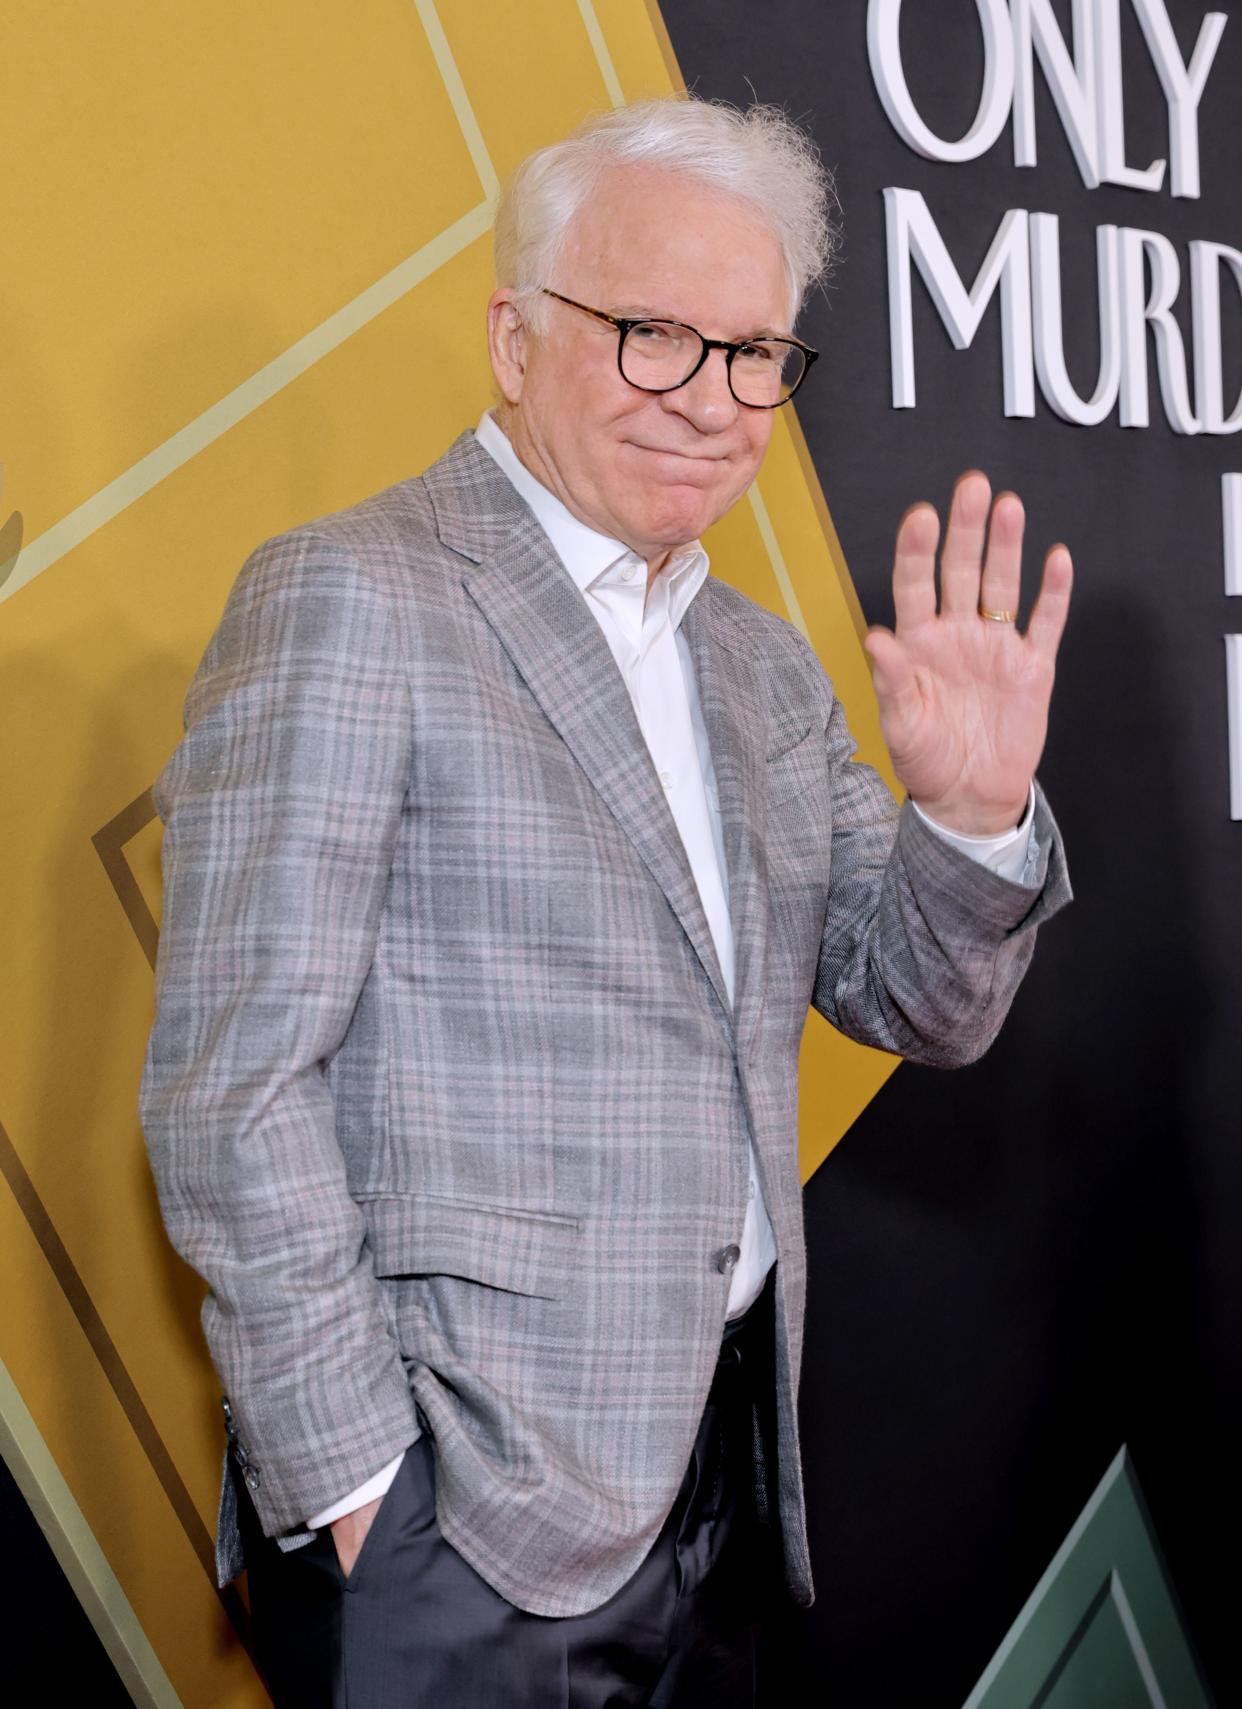 Steve Martin attends the Los Angeles premiere of "Only Murders In The Building" Season 2 on June 27, 2022. Martin opened up about his professional future in an interview with The Hollywood Reporter published Wednesday, saying he might slow things down after completing the Hulu comedy.